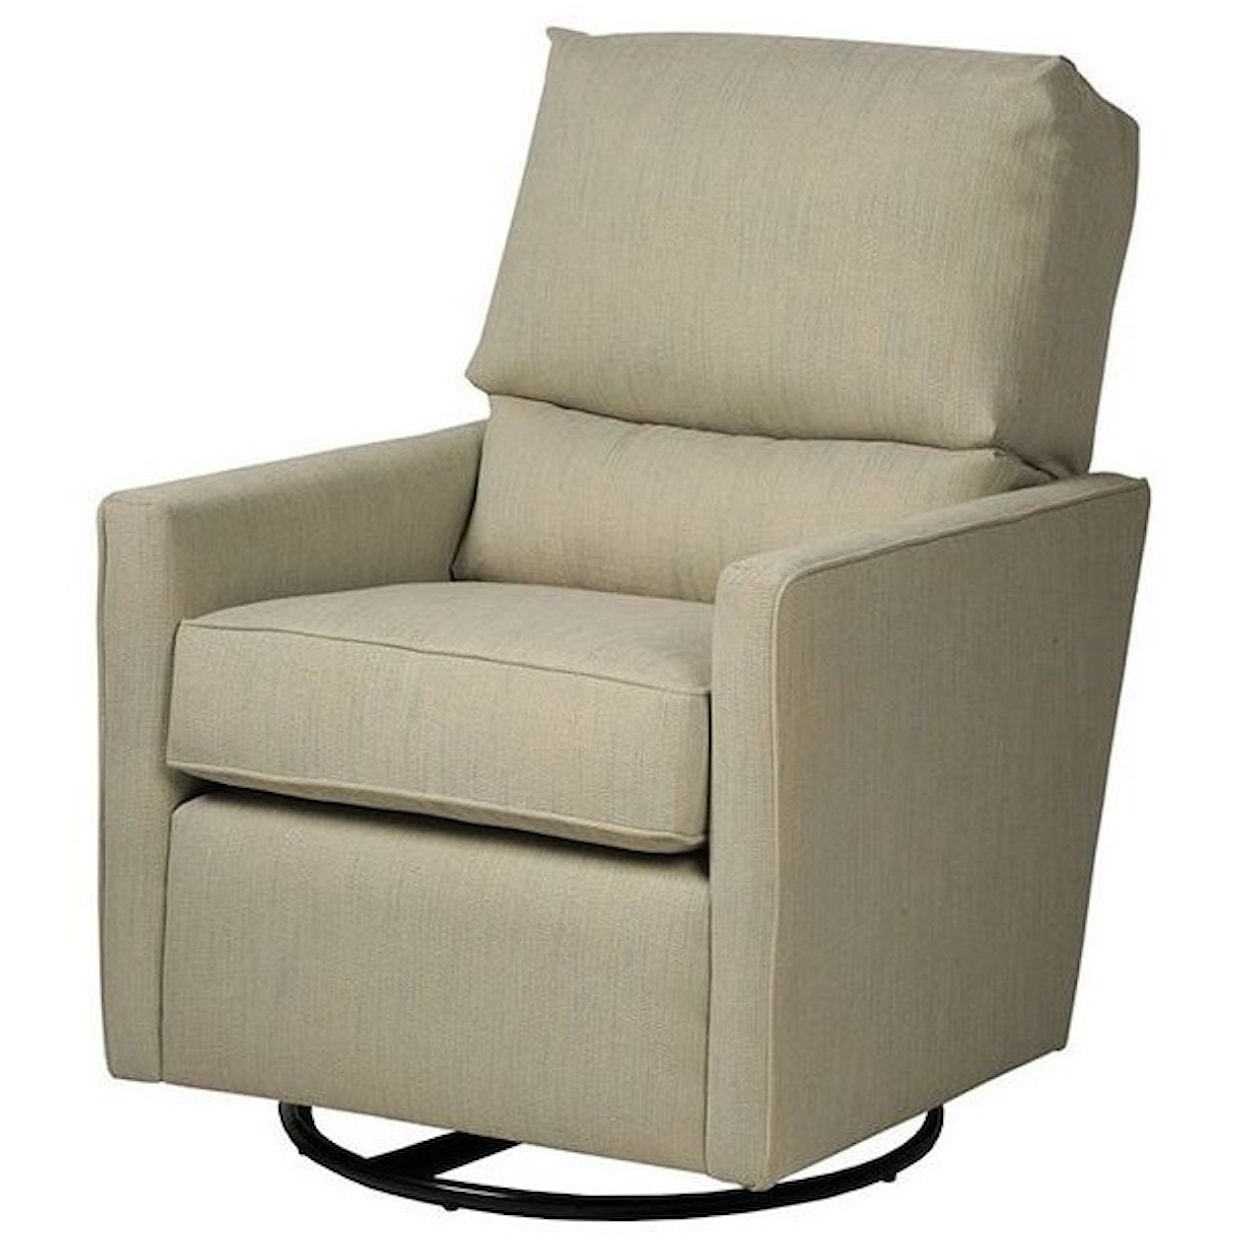 CH Living for Stone & Leigh Kaeden Glider and Ottoman